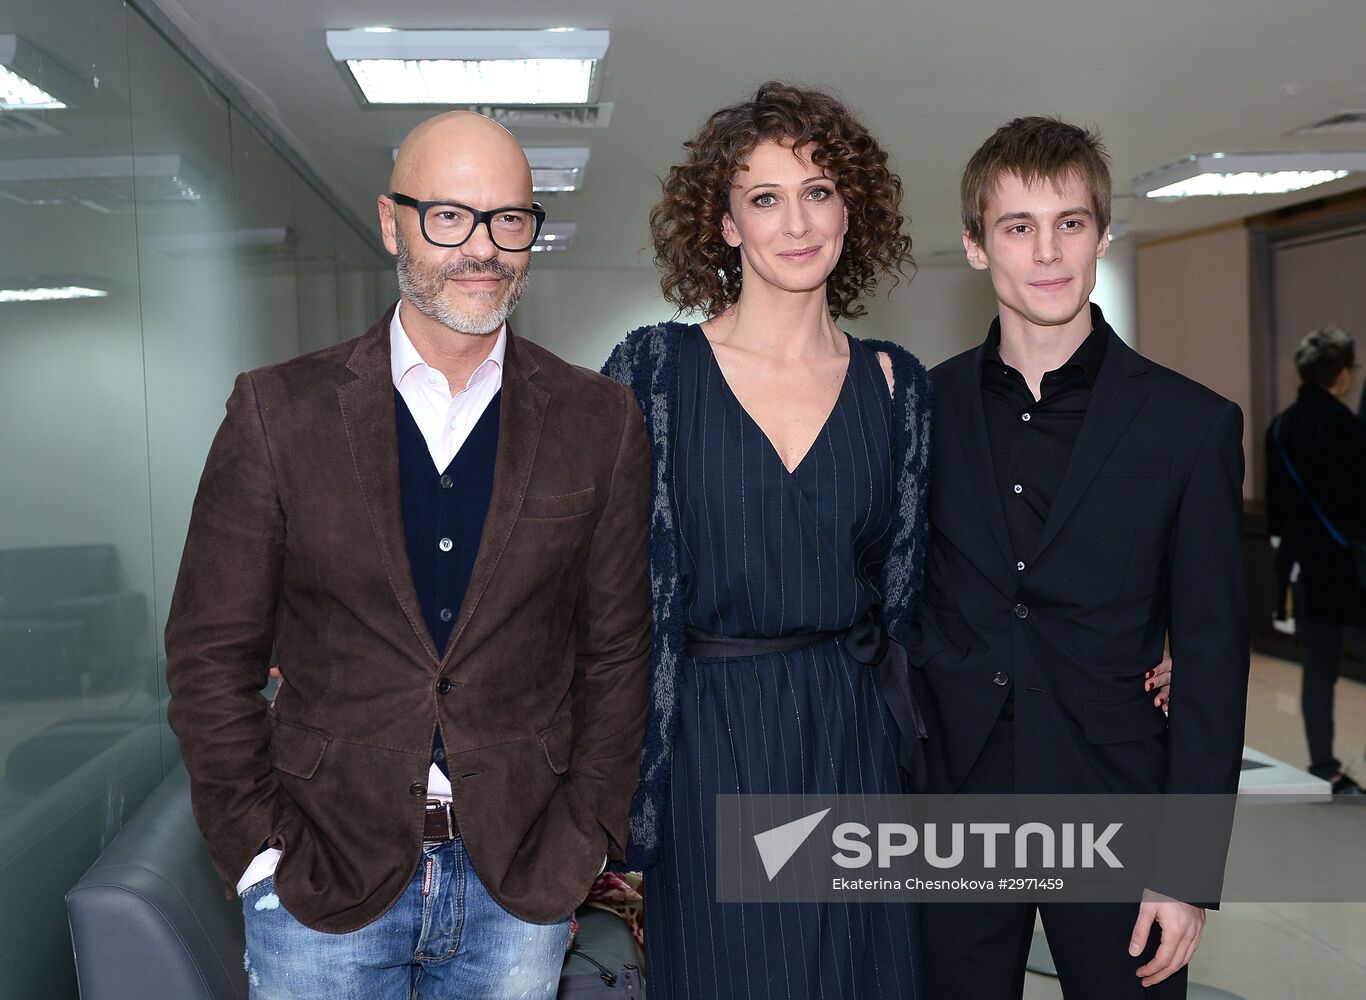 Premiere of Pavel Lungin's film Queen of Spades